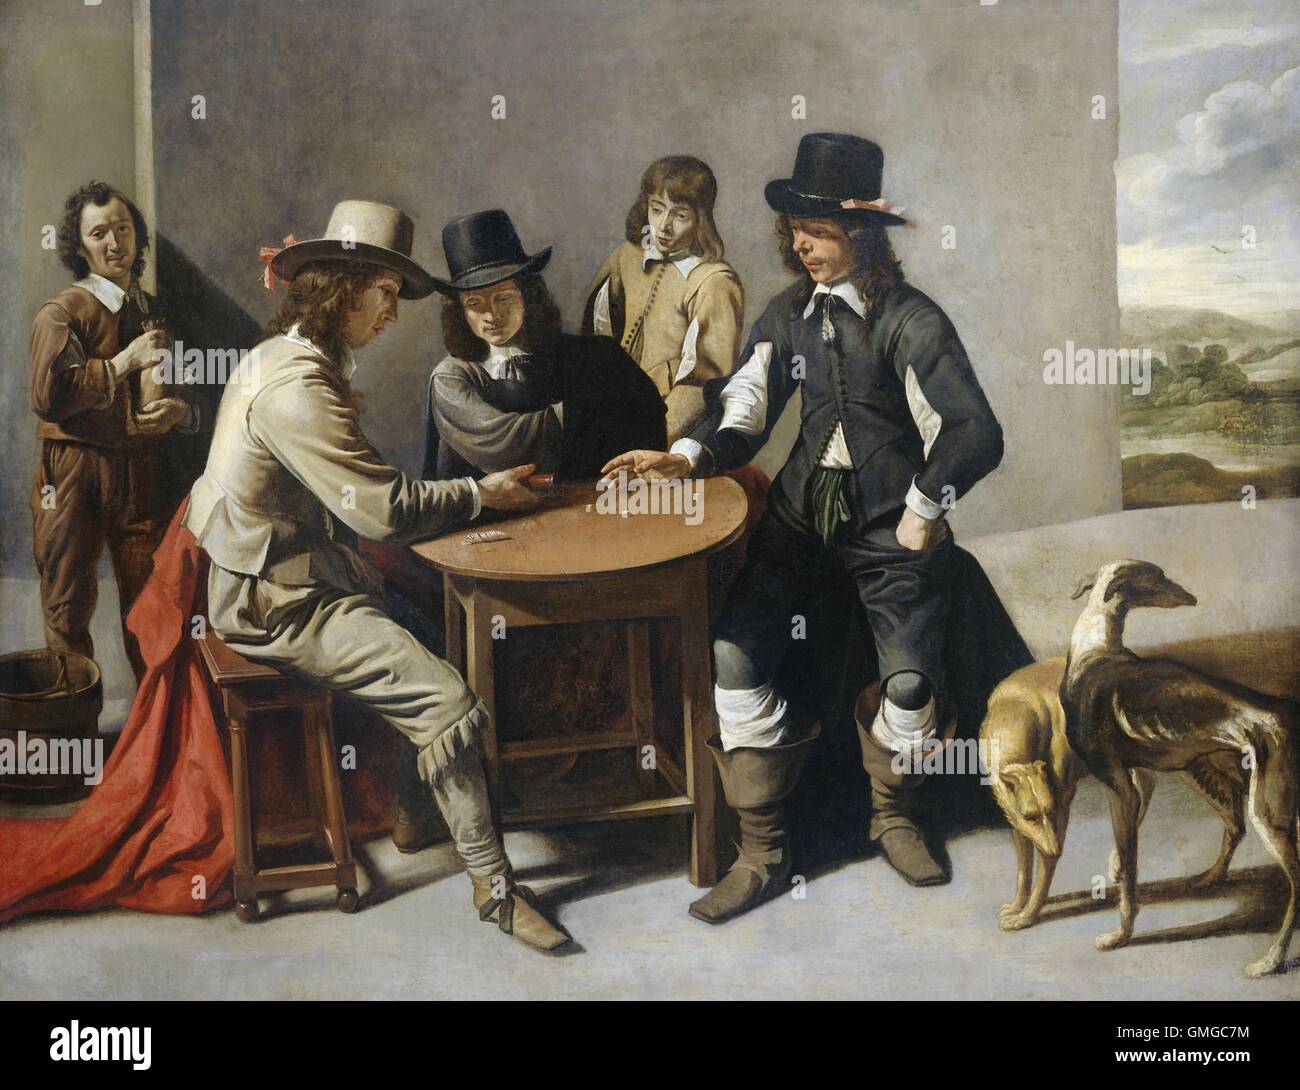 Dice Players (The Gamblers), by follower of Mathieu Le Nain, 1630-80, French painting, oil on canvas. Also called 'The Gamblers'. Three men around a table play dice as two others watch (BSLOC 2016 3 175) Stock Photo